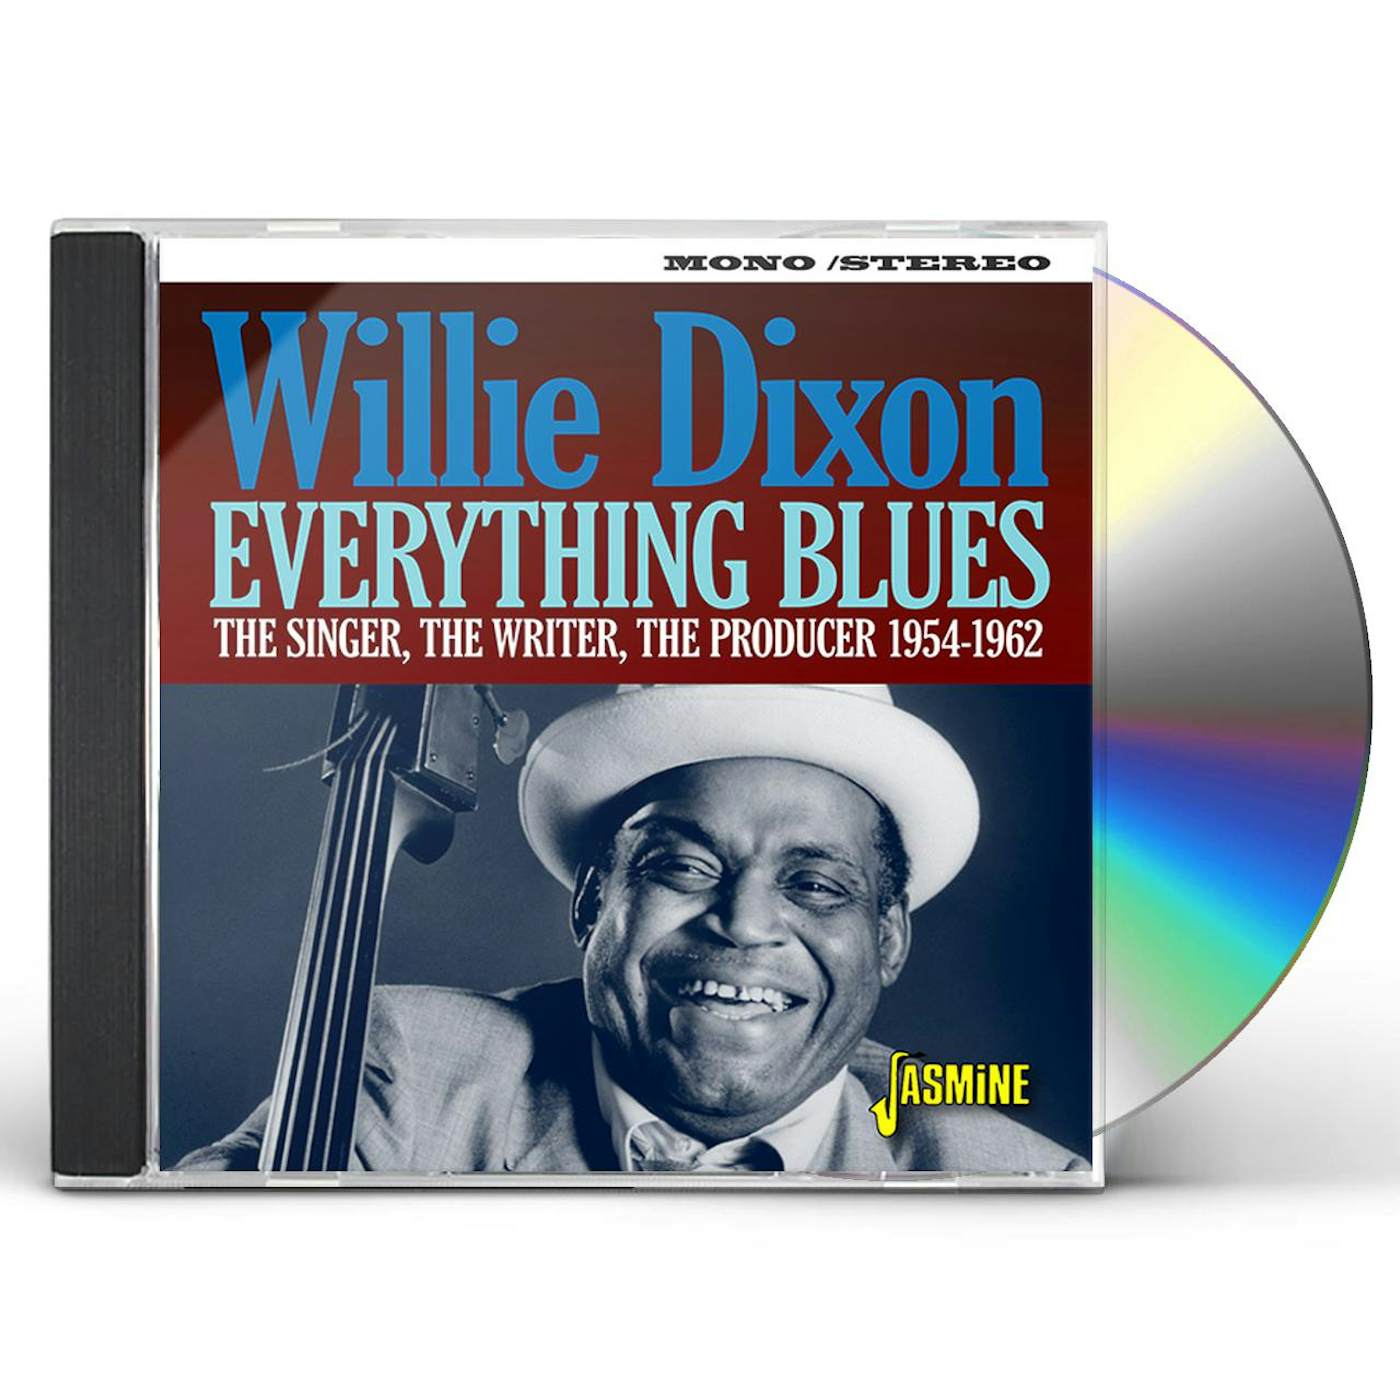 Willie Dixon EVERYTHING BLUES: SINGER WRITER PRODUCER 1954-1962 CD